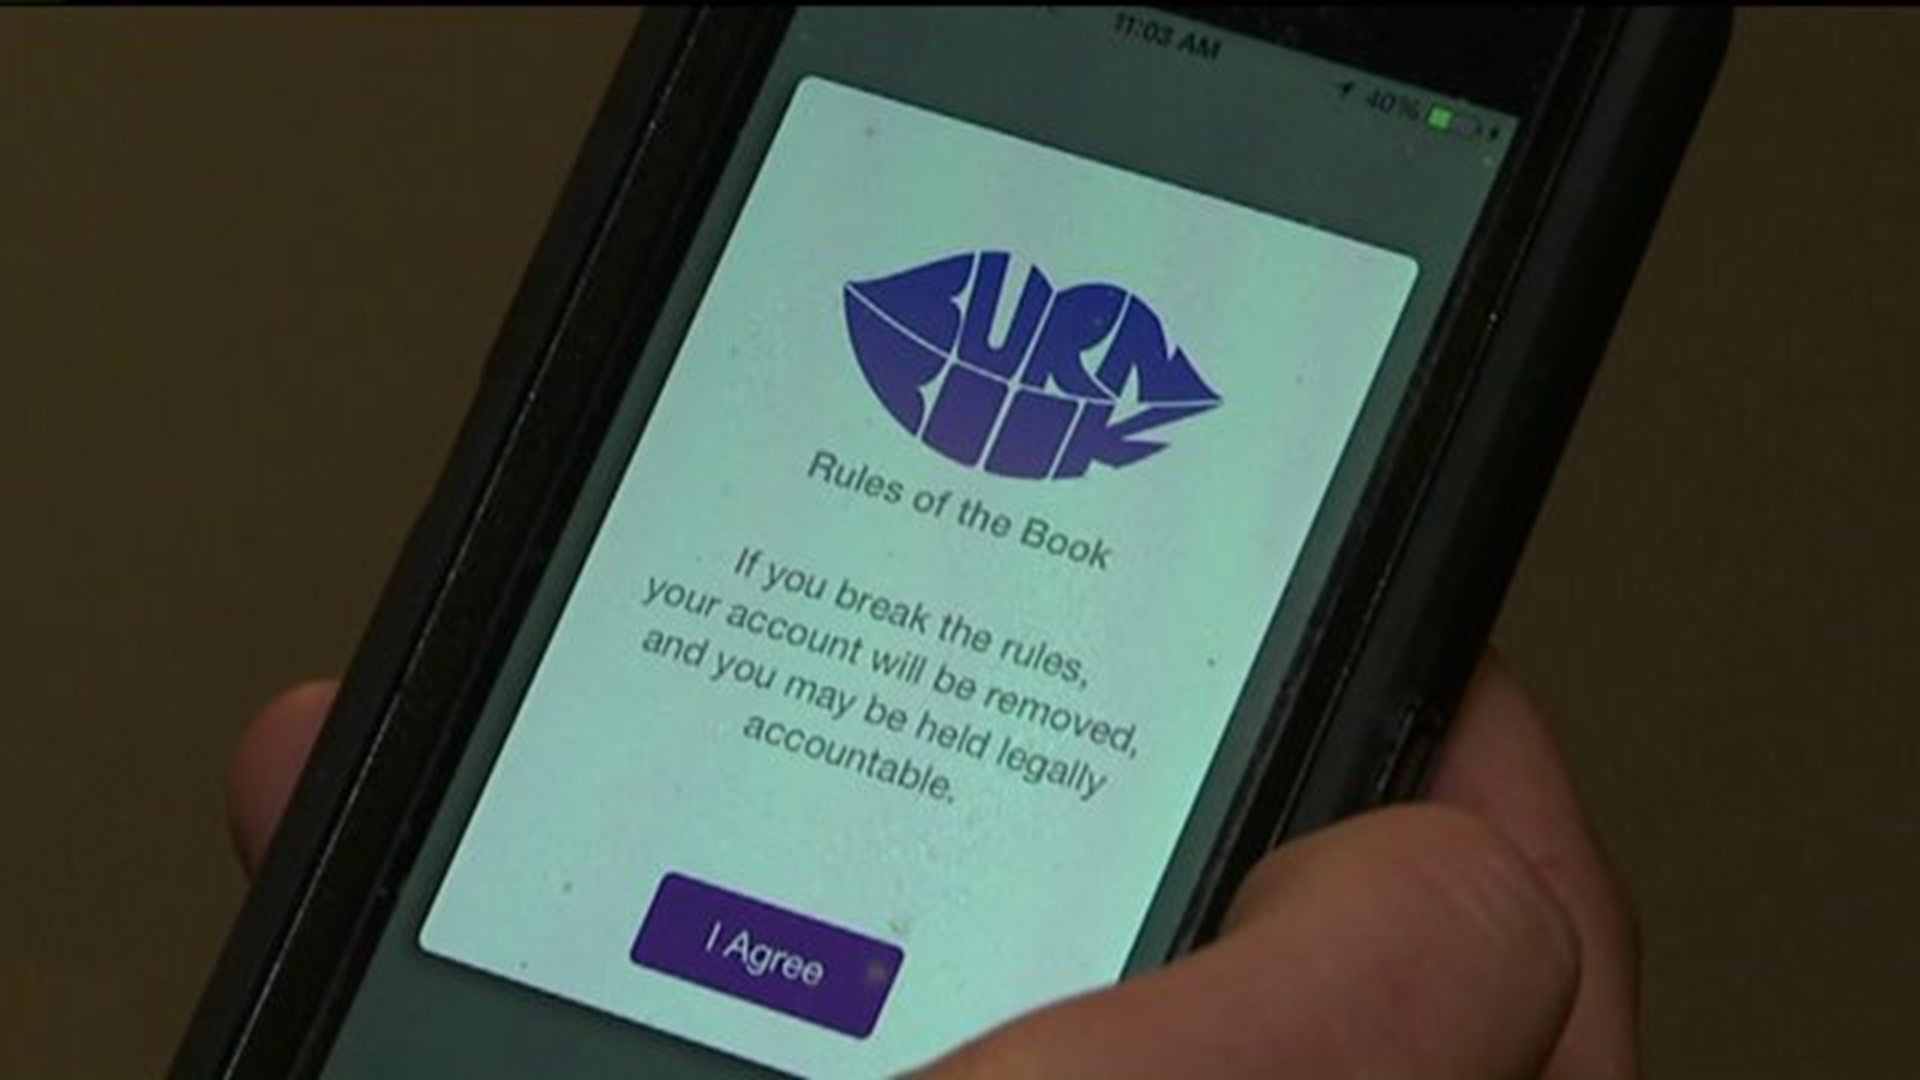 App Raises Concerns About Cyber-Bullying